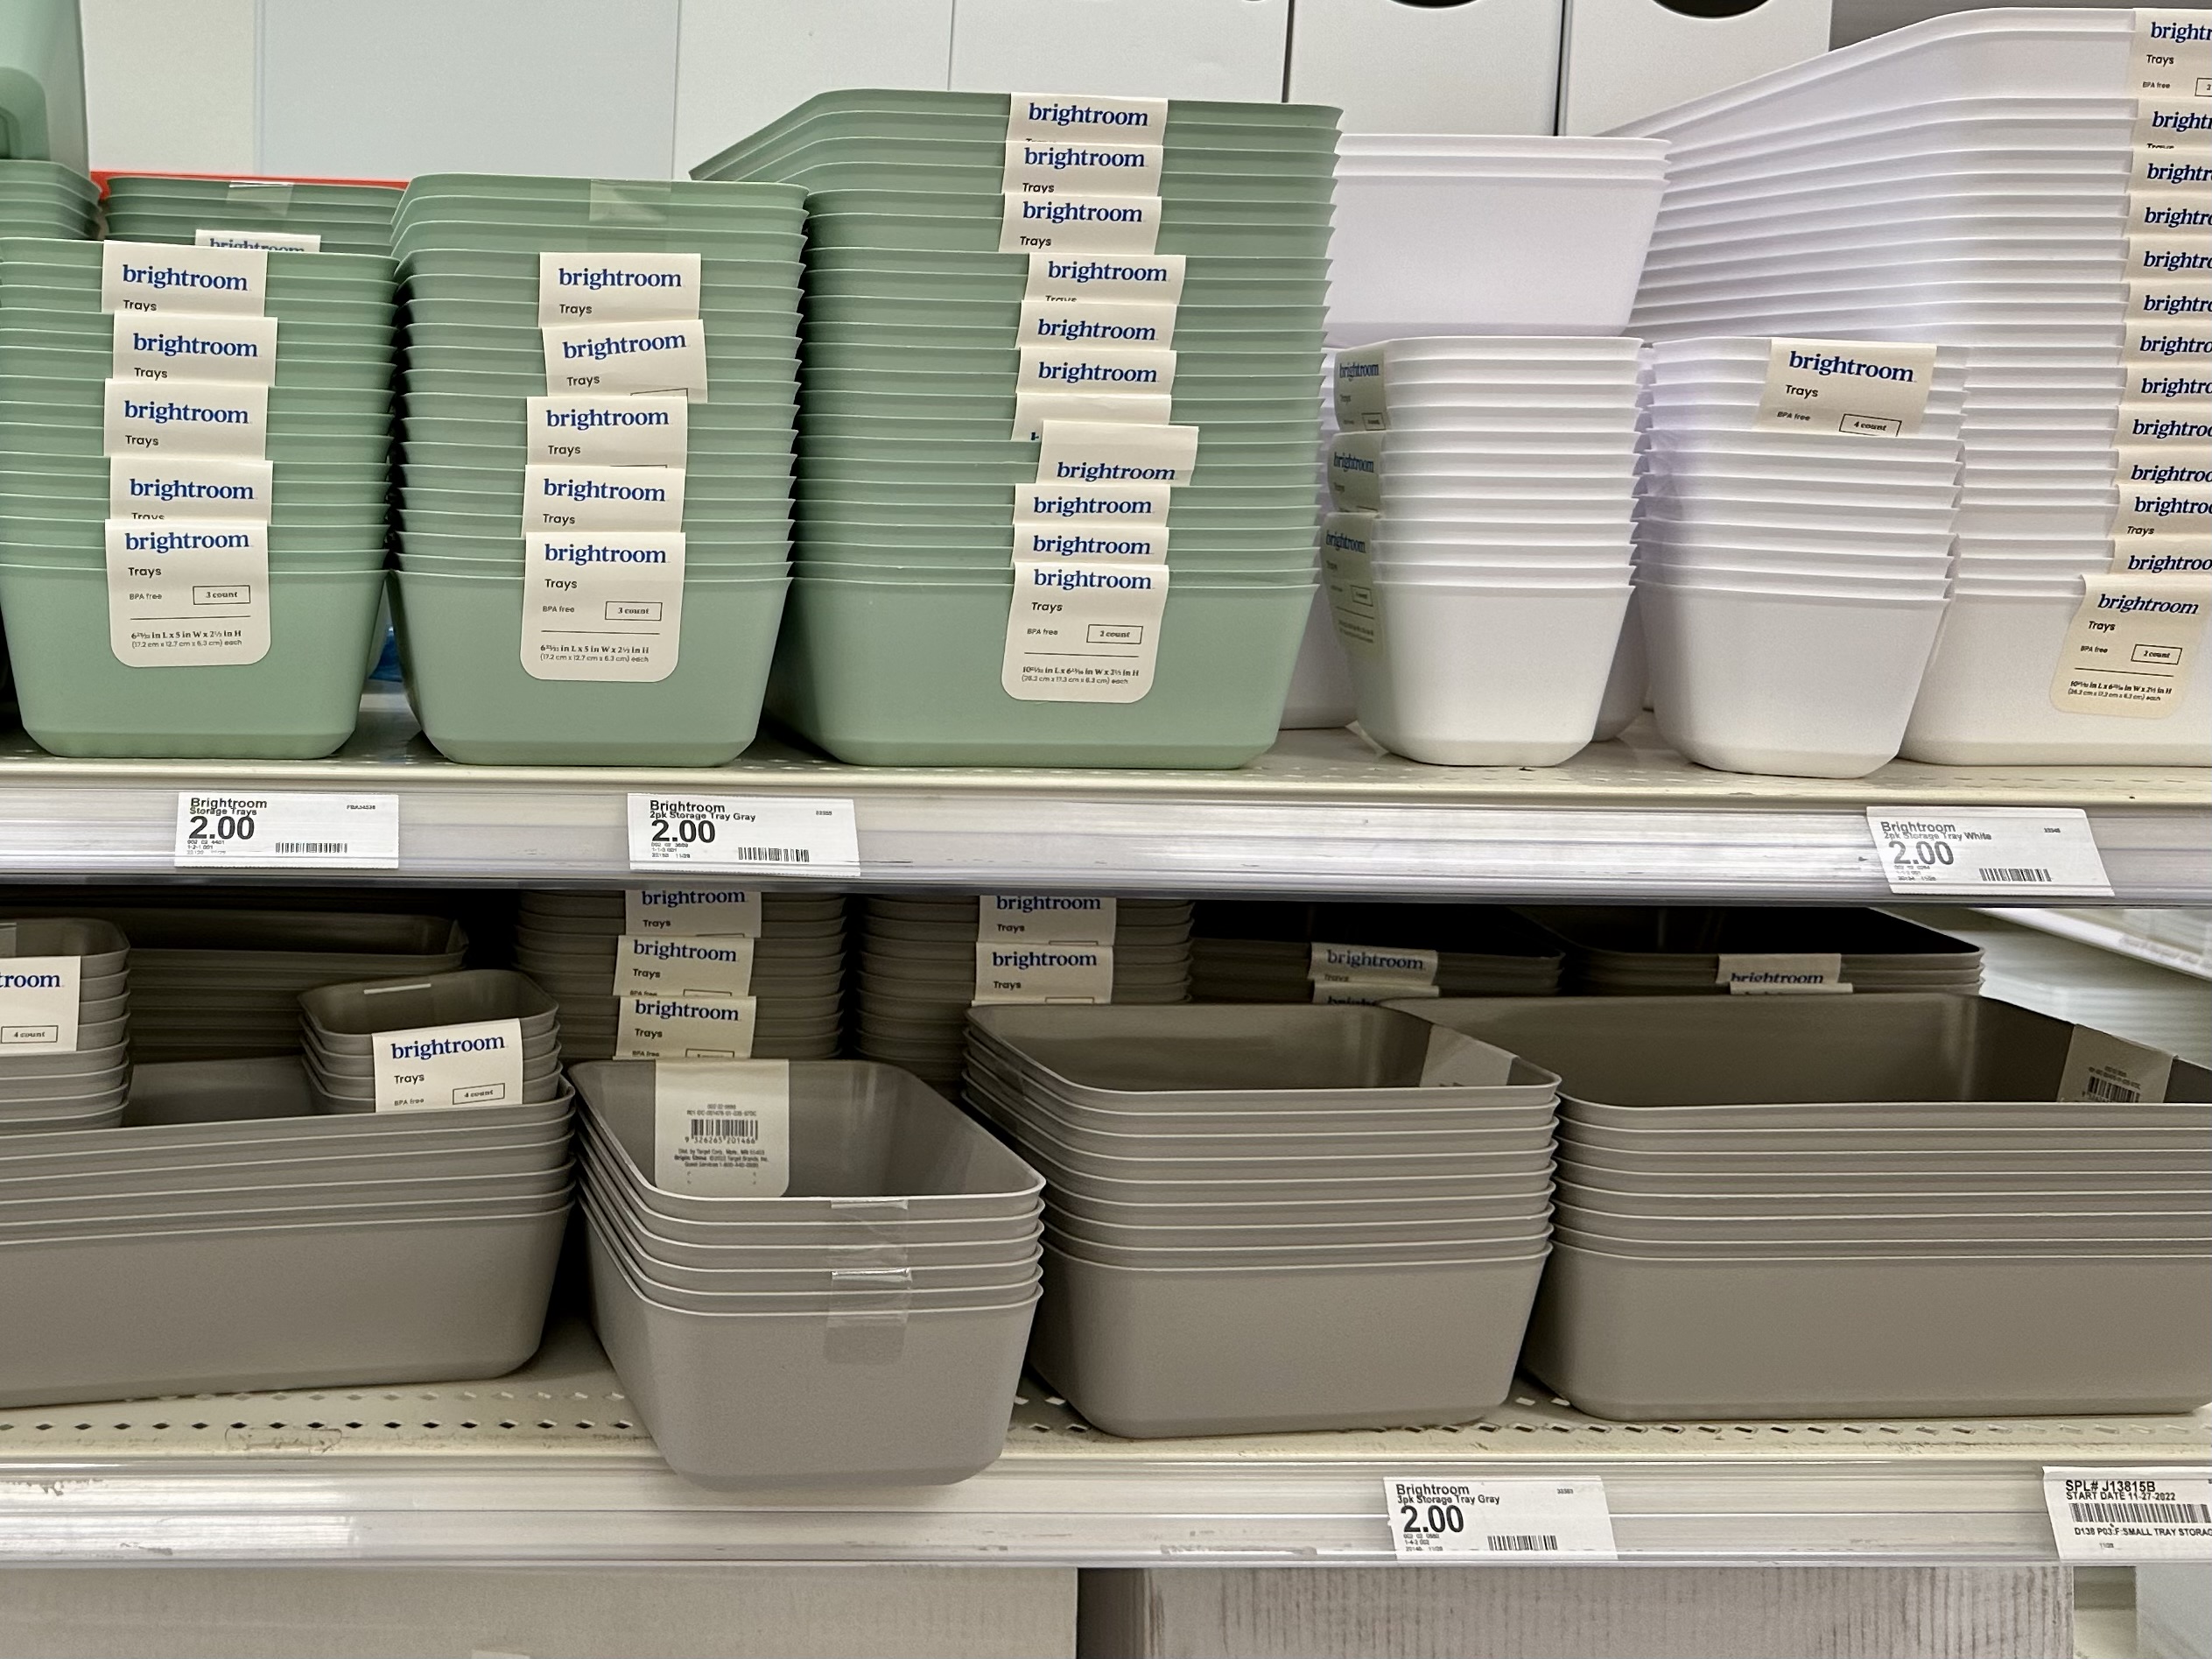 brightroom trays, sold at Target